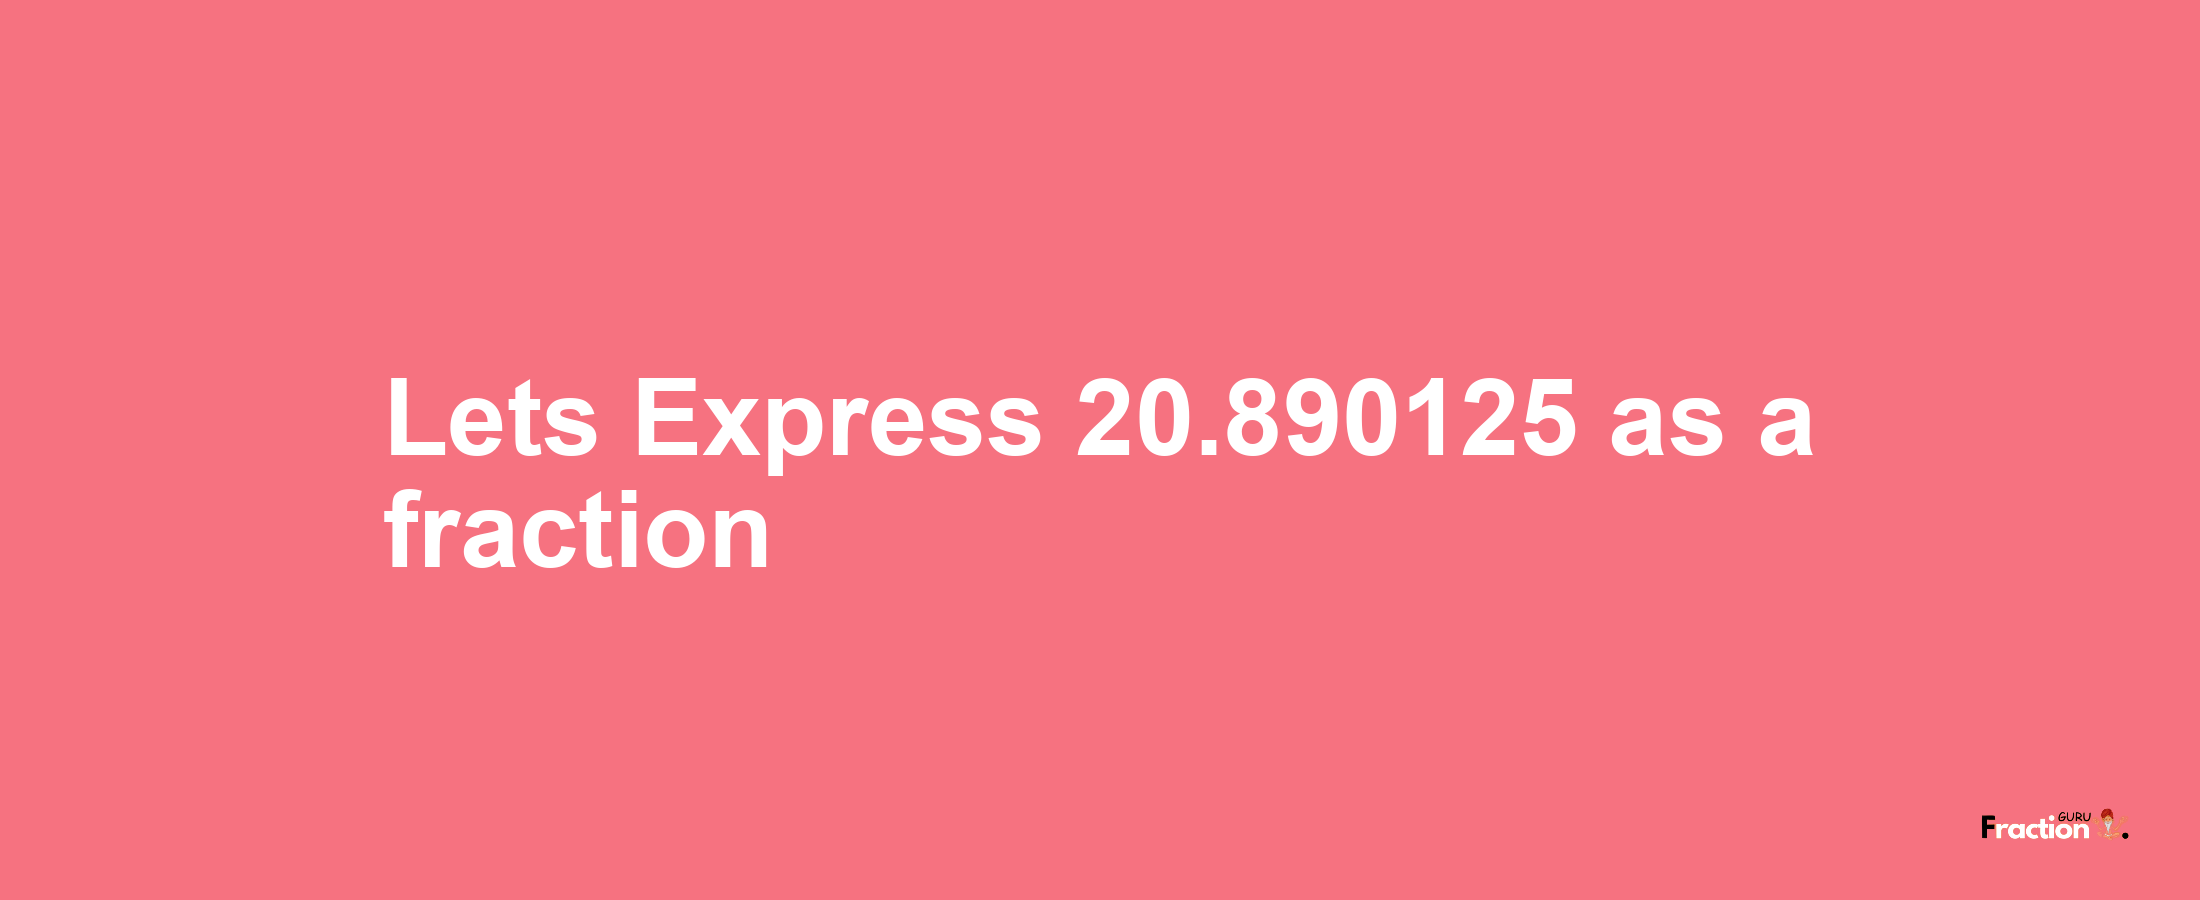 Lets Express 20.890125 as afraction